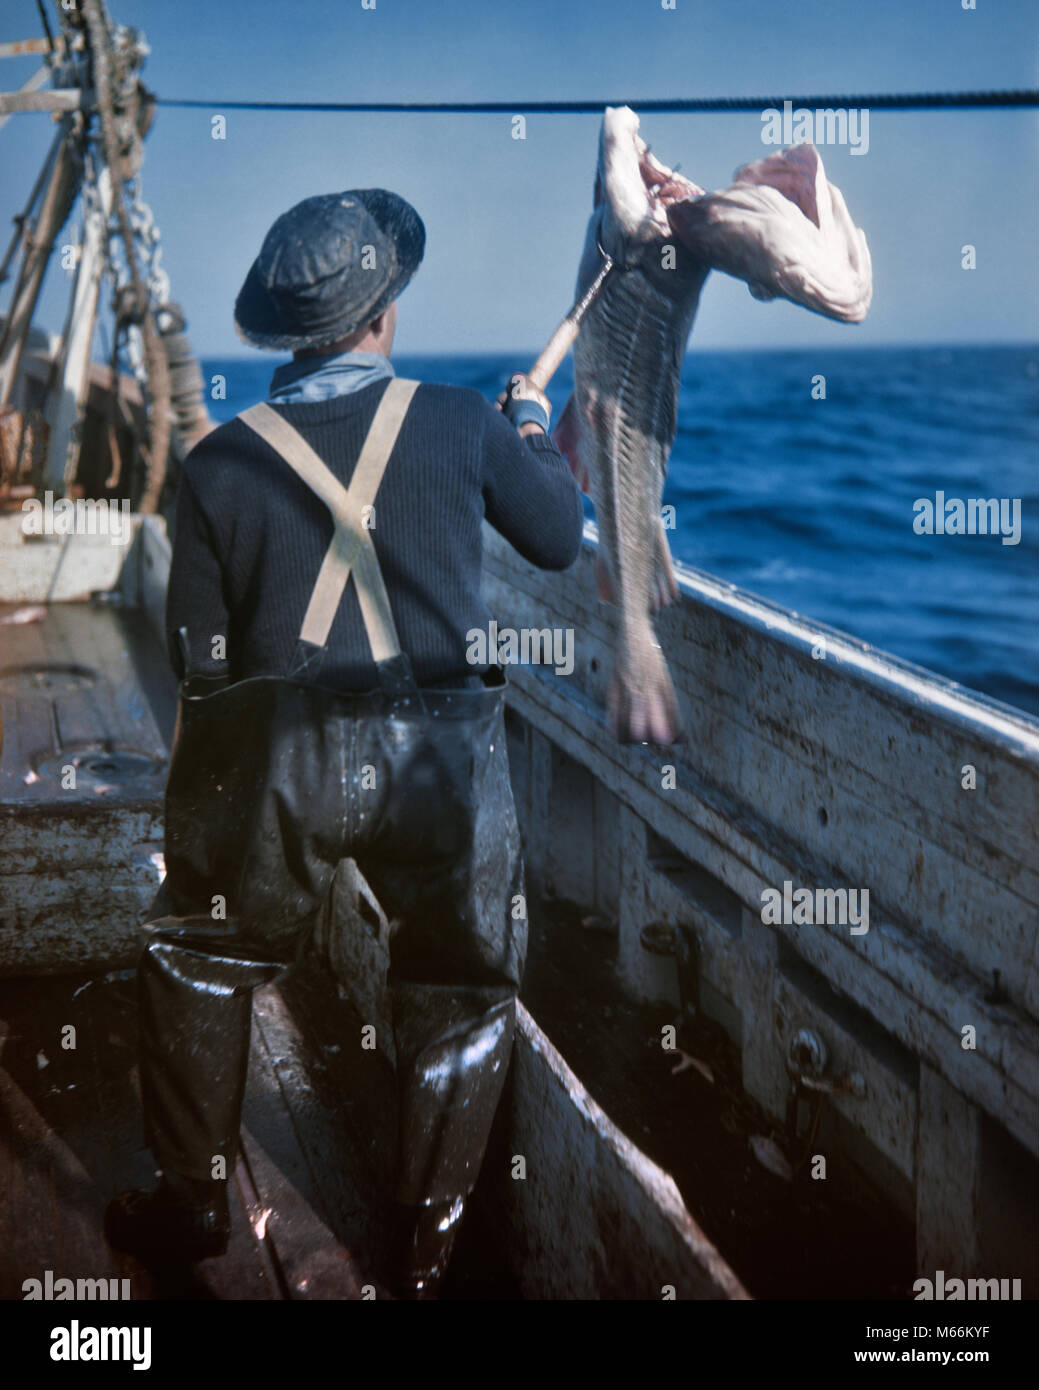 https://c8.alamy.com/comp/M66KYF/1950s-worker-aboard-commercial-deep-sea-fishing-boat-spearing-lifting-M66KYF.jpg